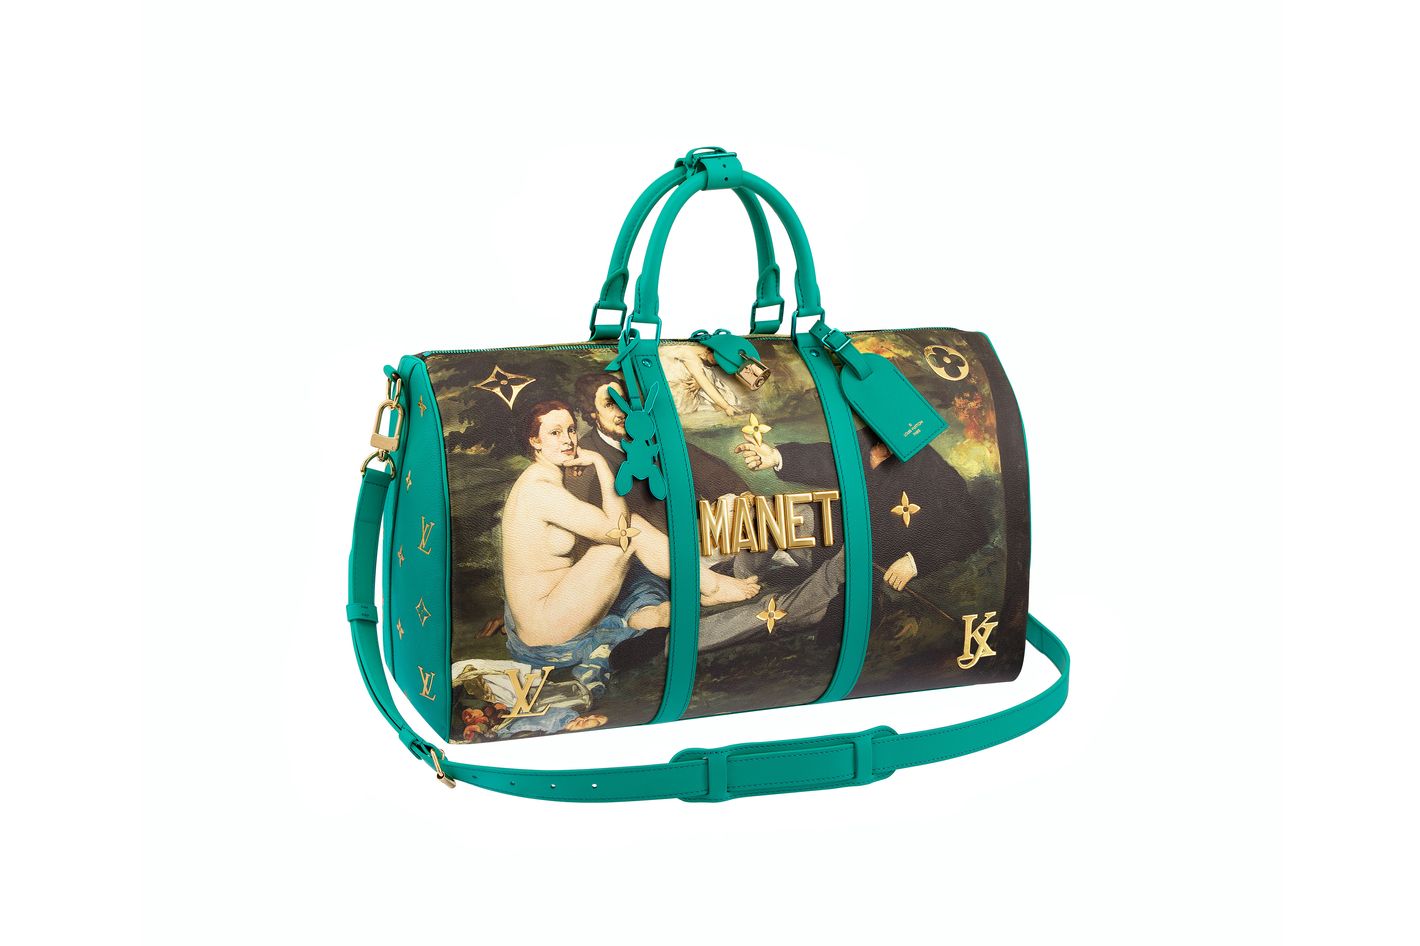 Louis Vuitton to Release More 'Masters' Bags With Jeff Koons